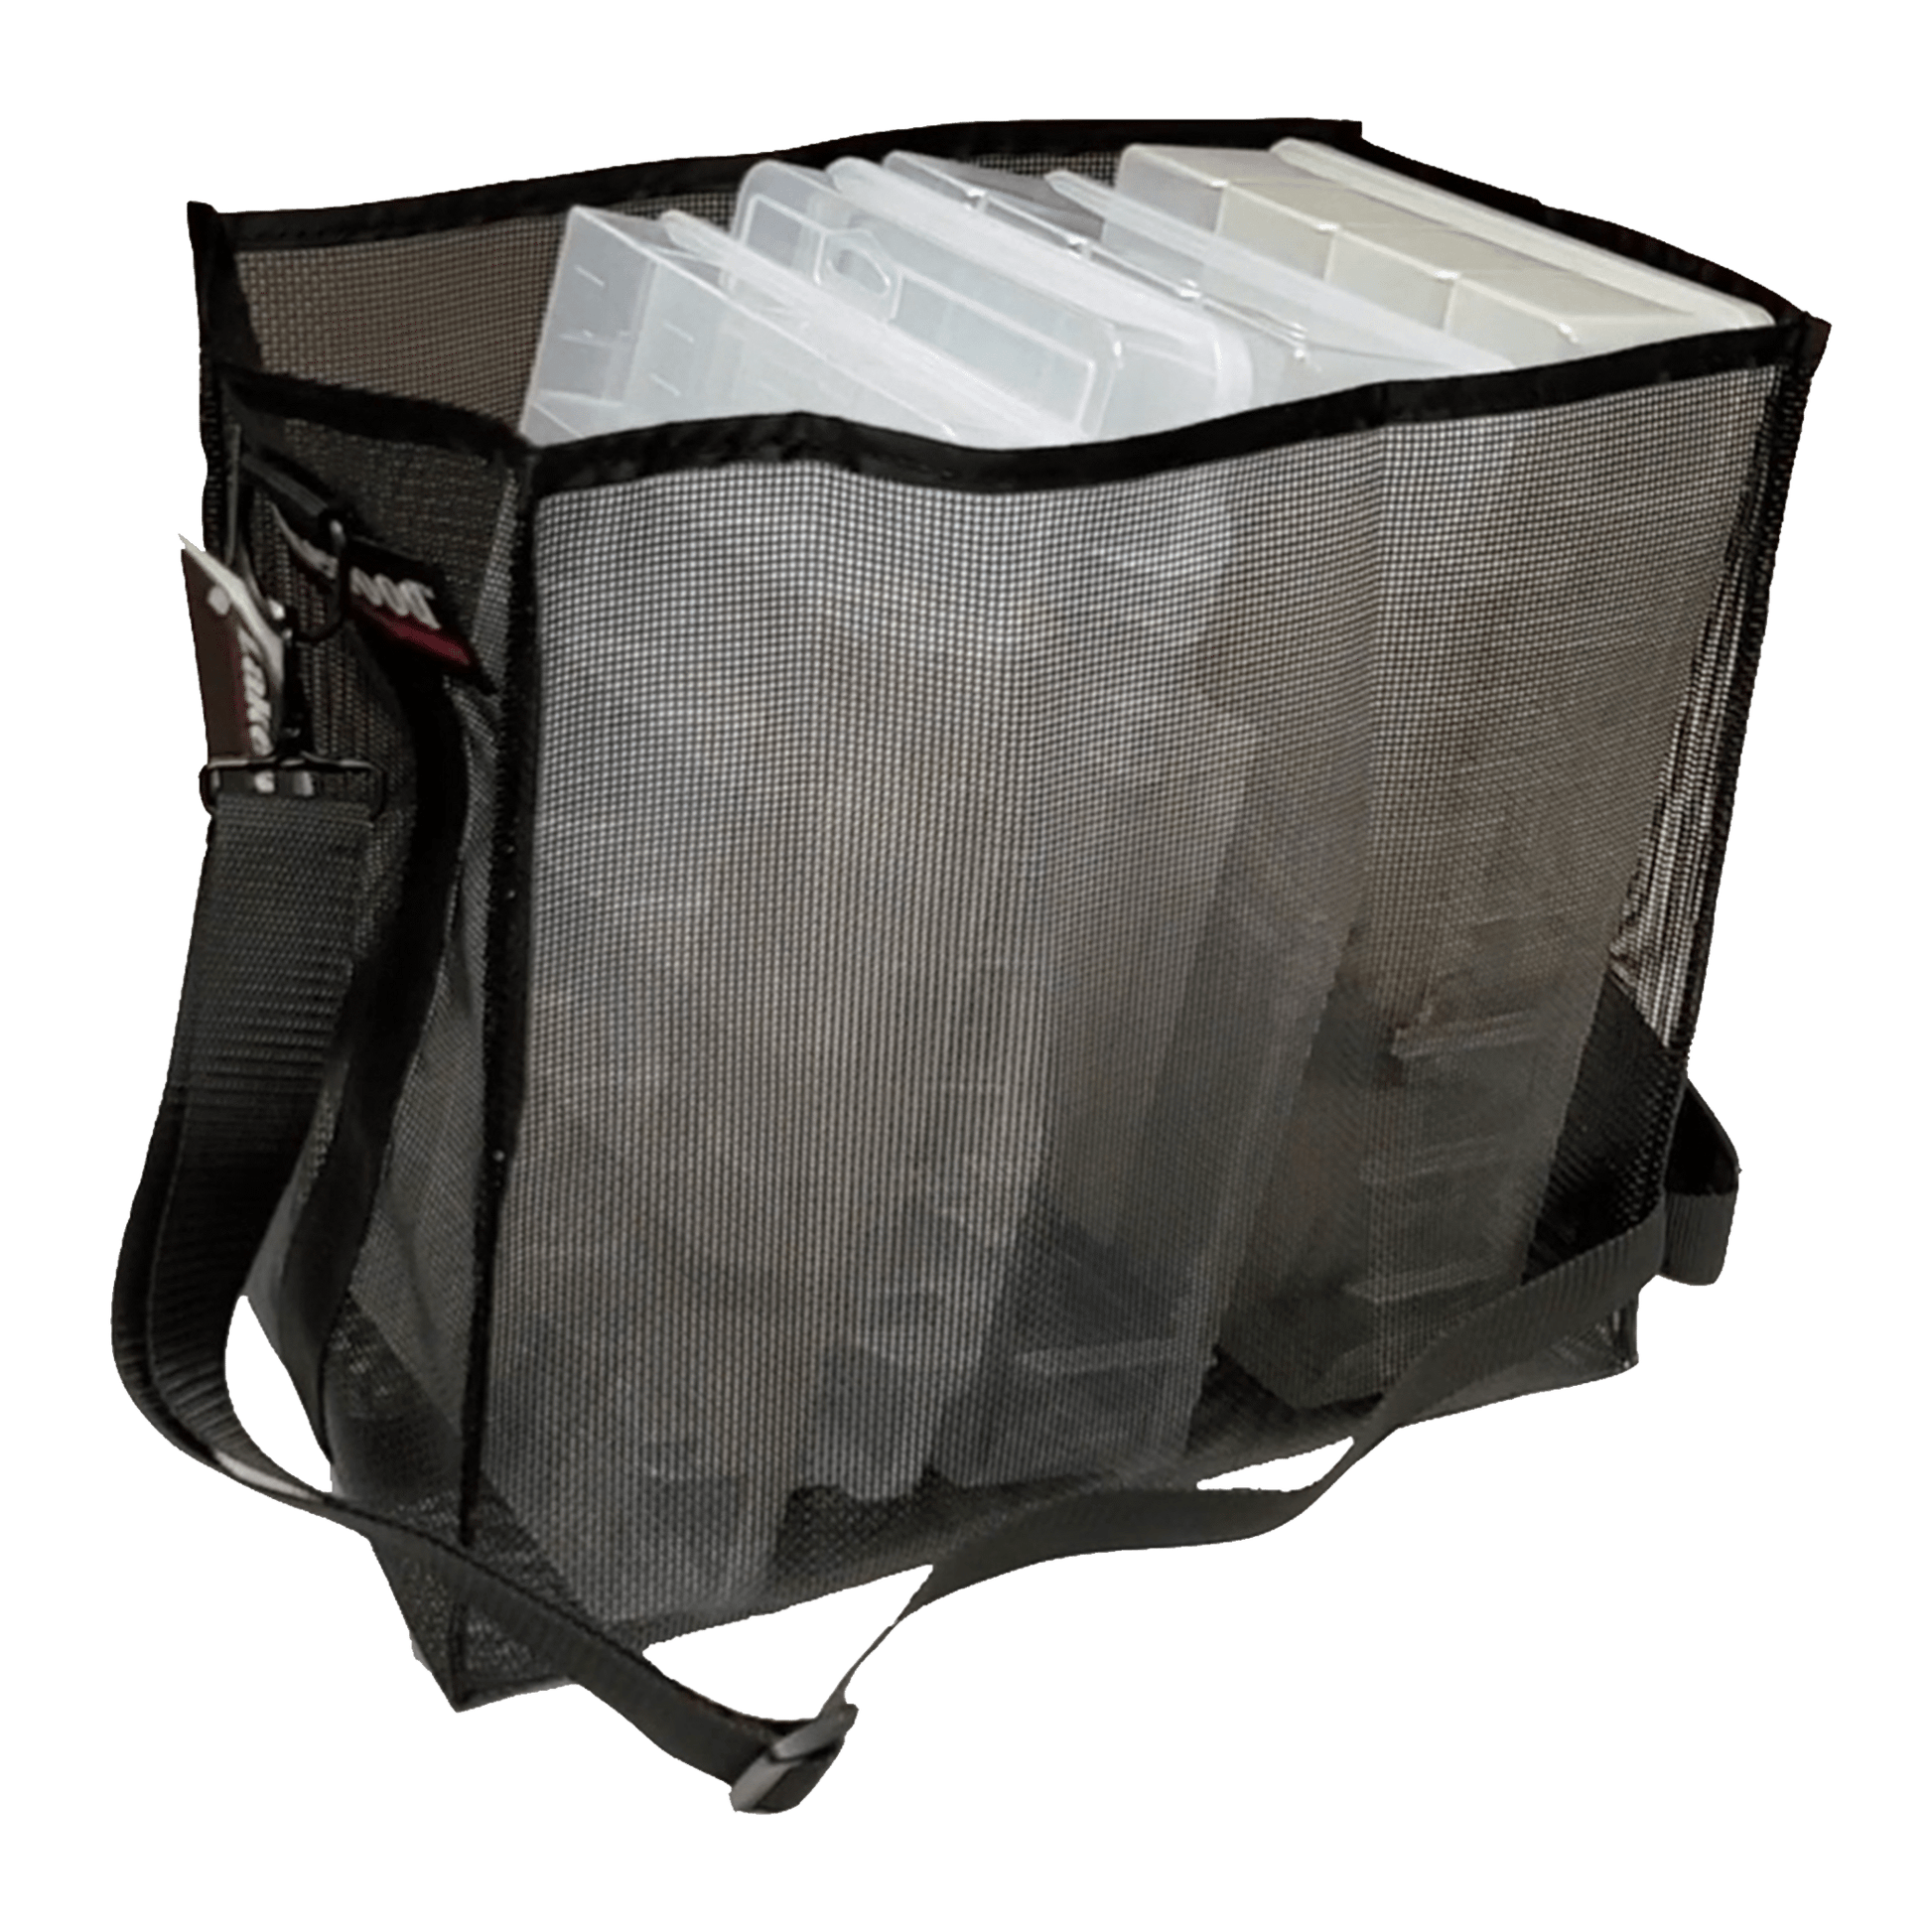 Lakewood Products - Money Bags - Mesh Bag Storage Solution - 2 Sizes Available! - Angler's Pro Tackle & Outdoors